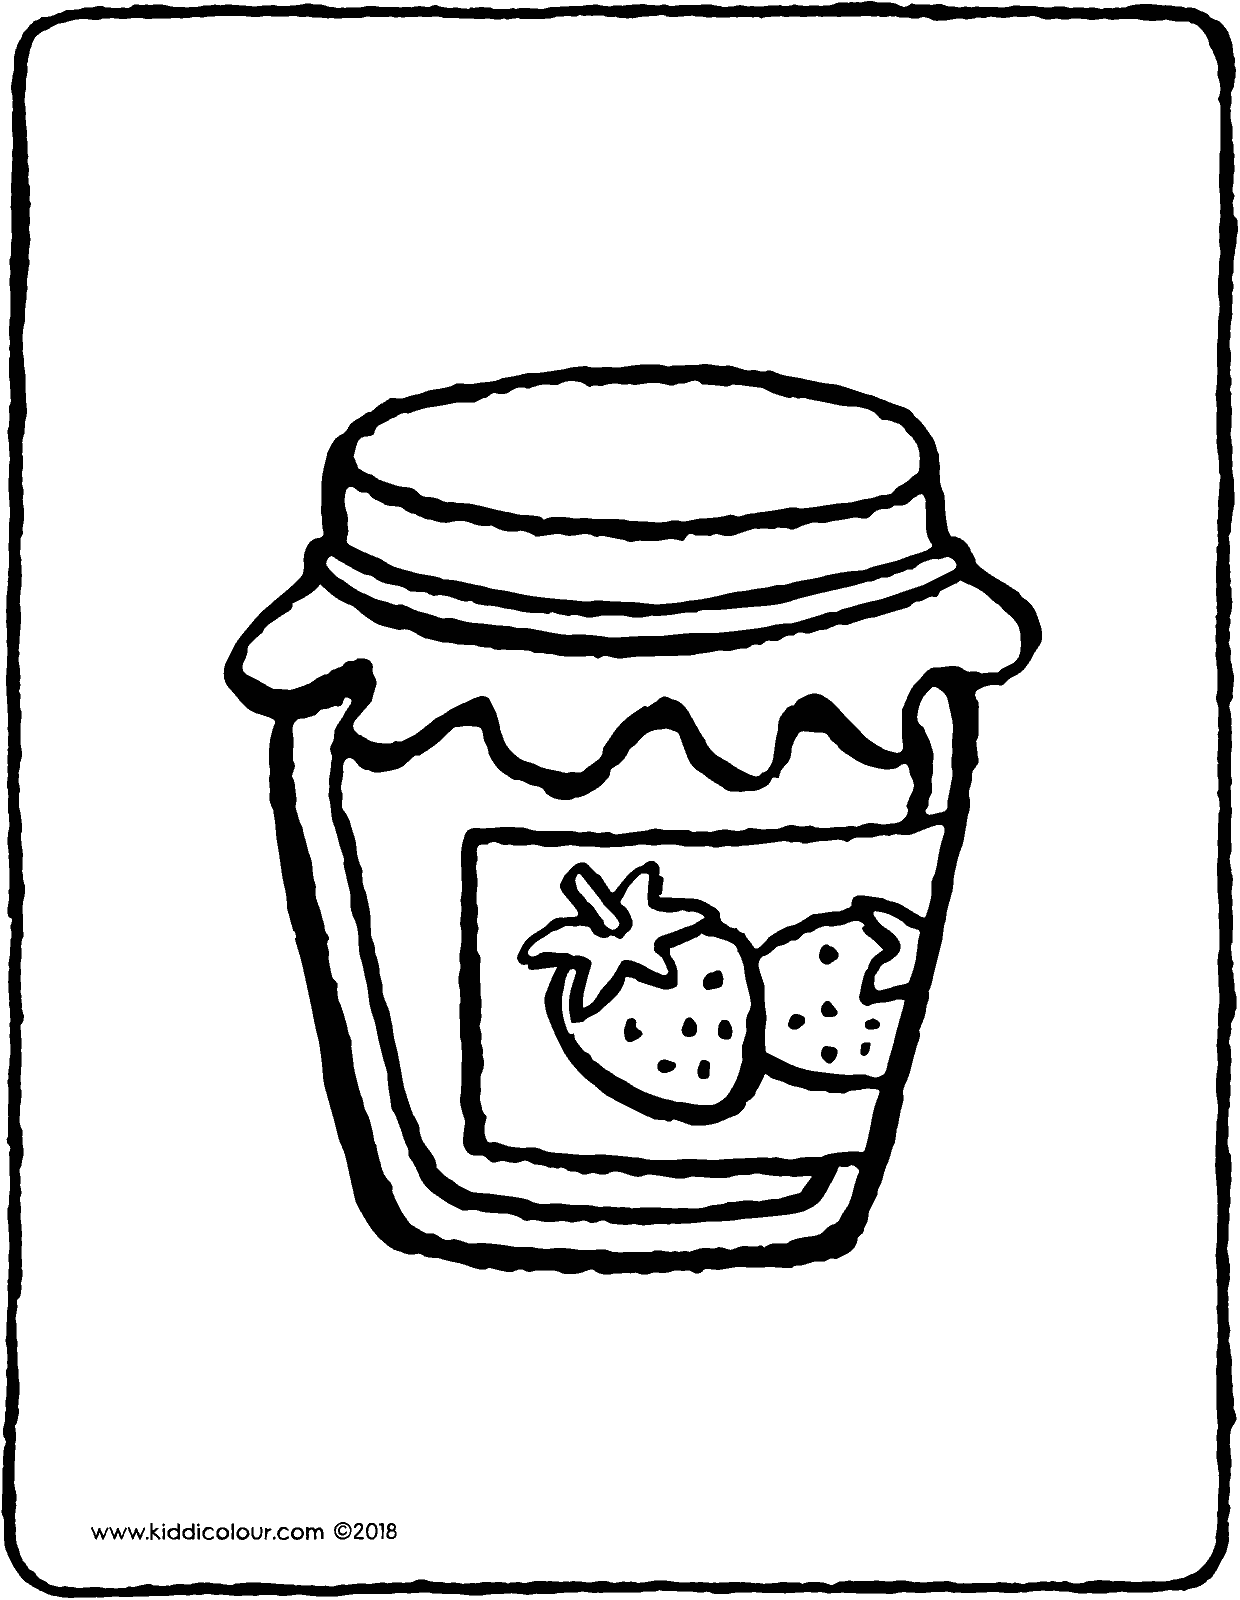 Jam Jar Page Coloring Pages